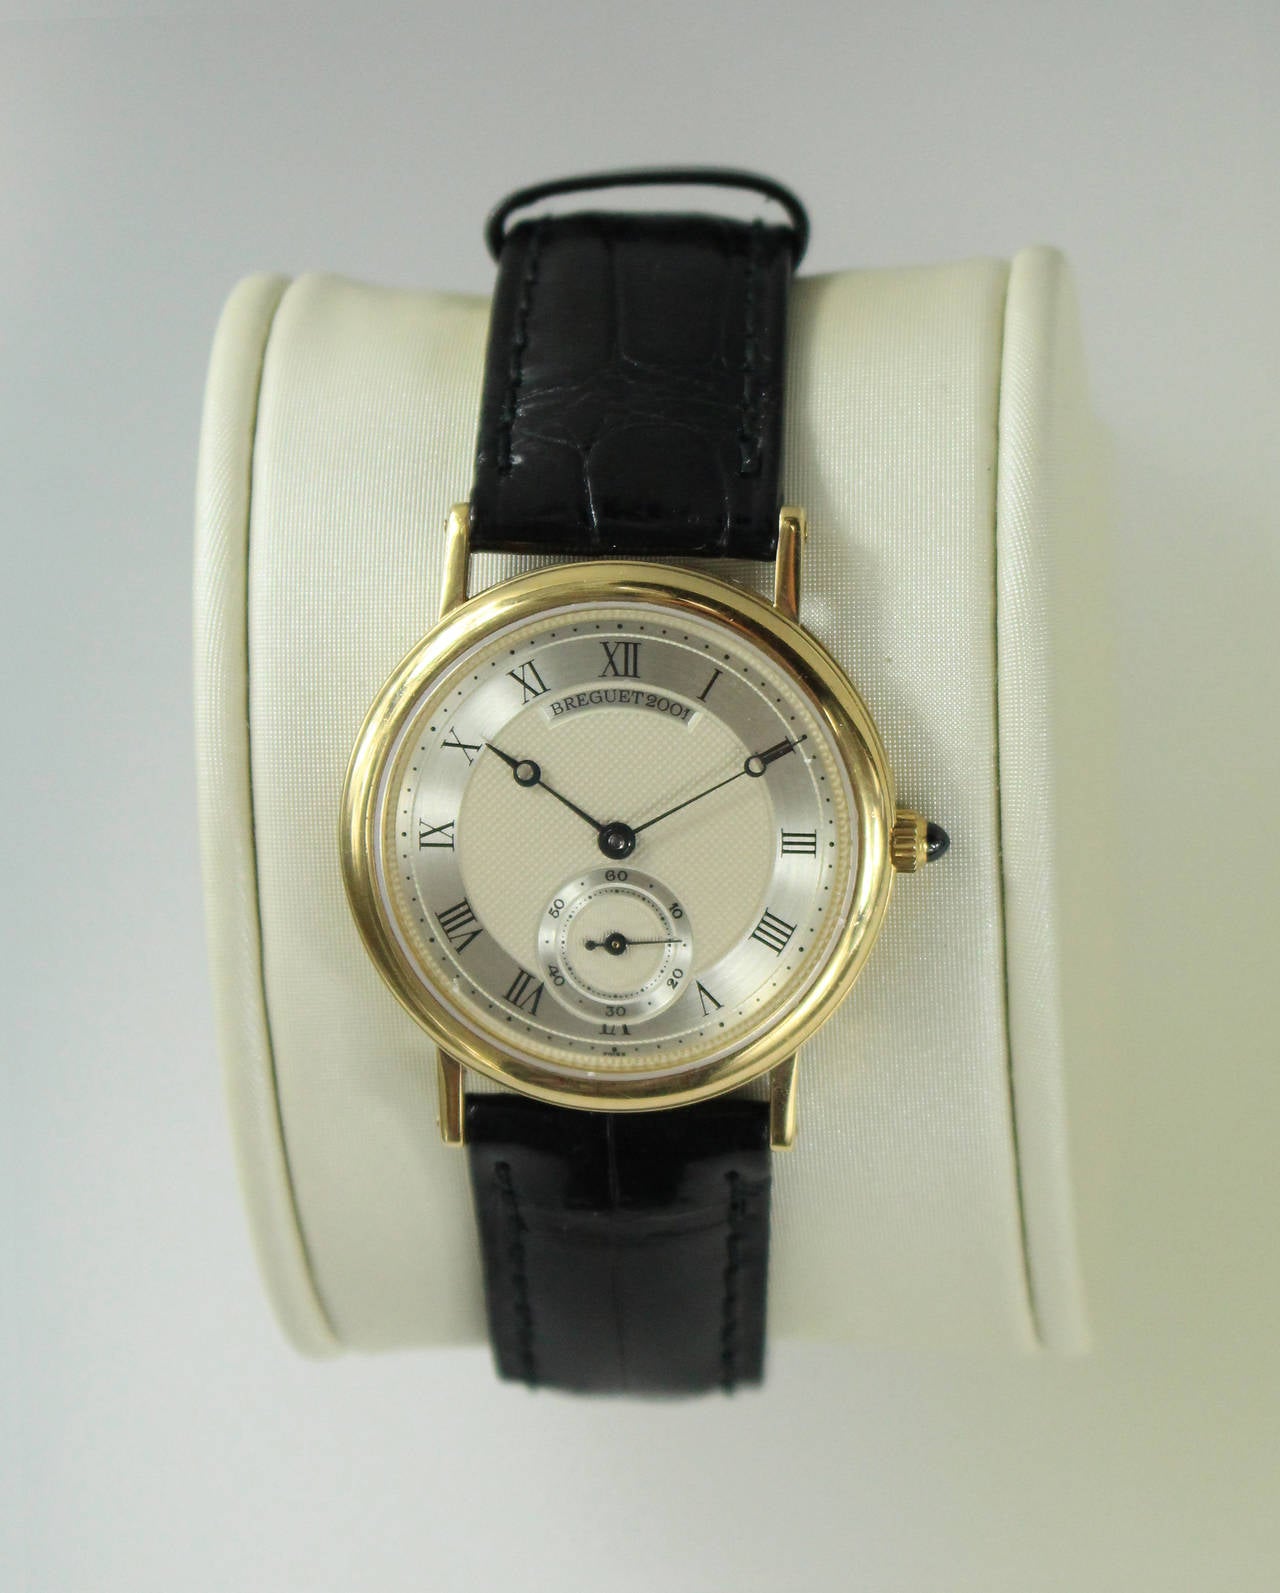 Breguet classique manual wind watch on a black strap with a gold tang buckle. 
Second hand at  6 o'clock.
Diameter 33mm.